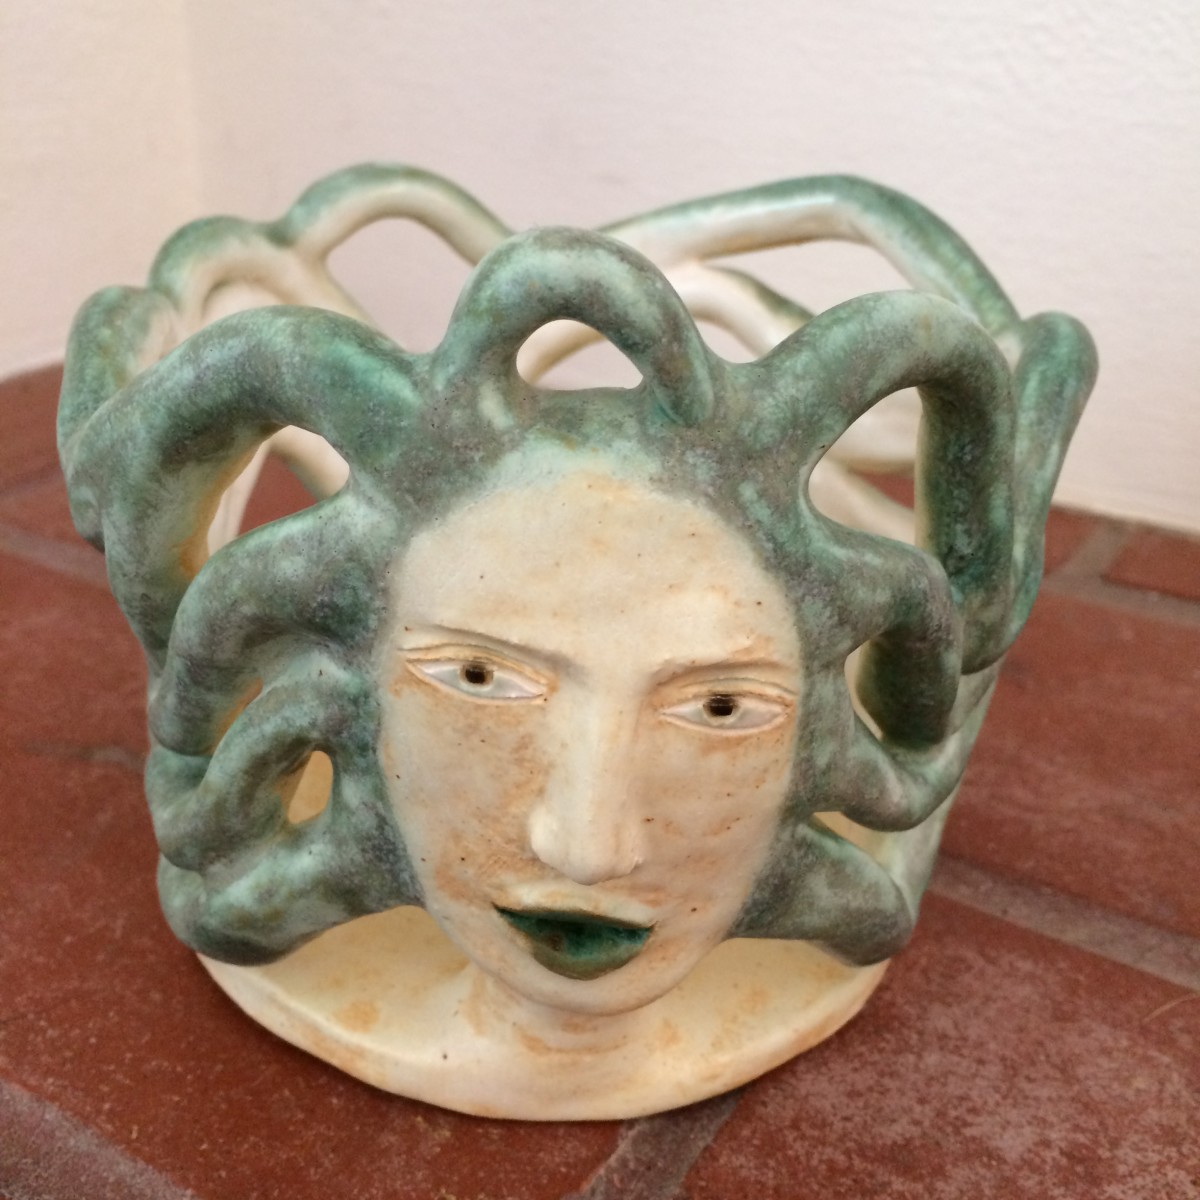 Sea Goddess candle holder by Nell Eakin 